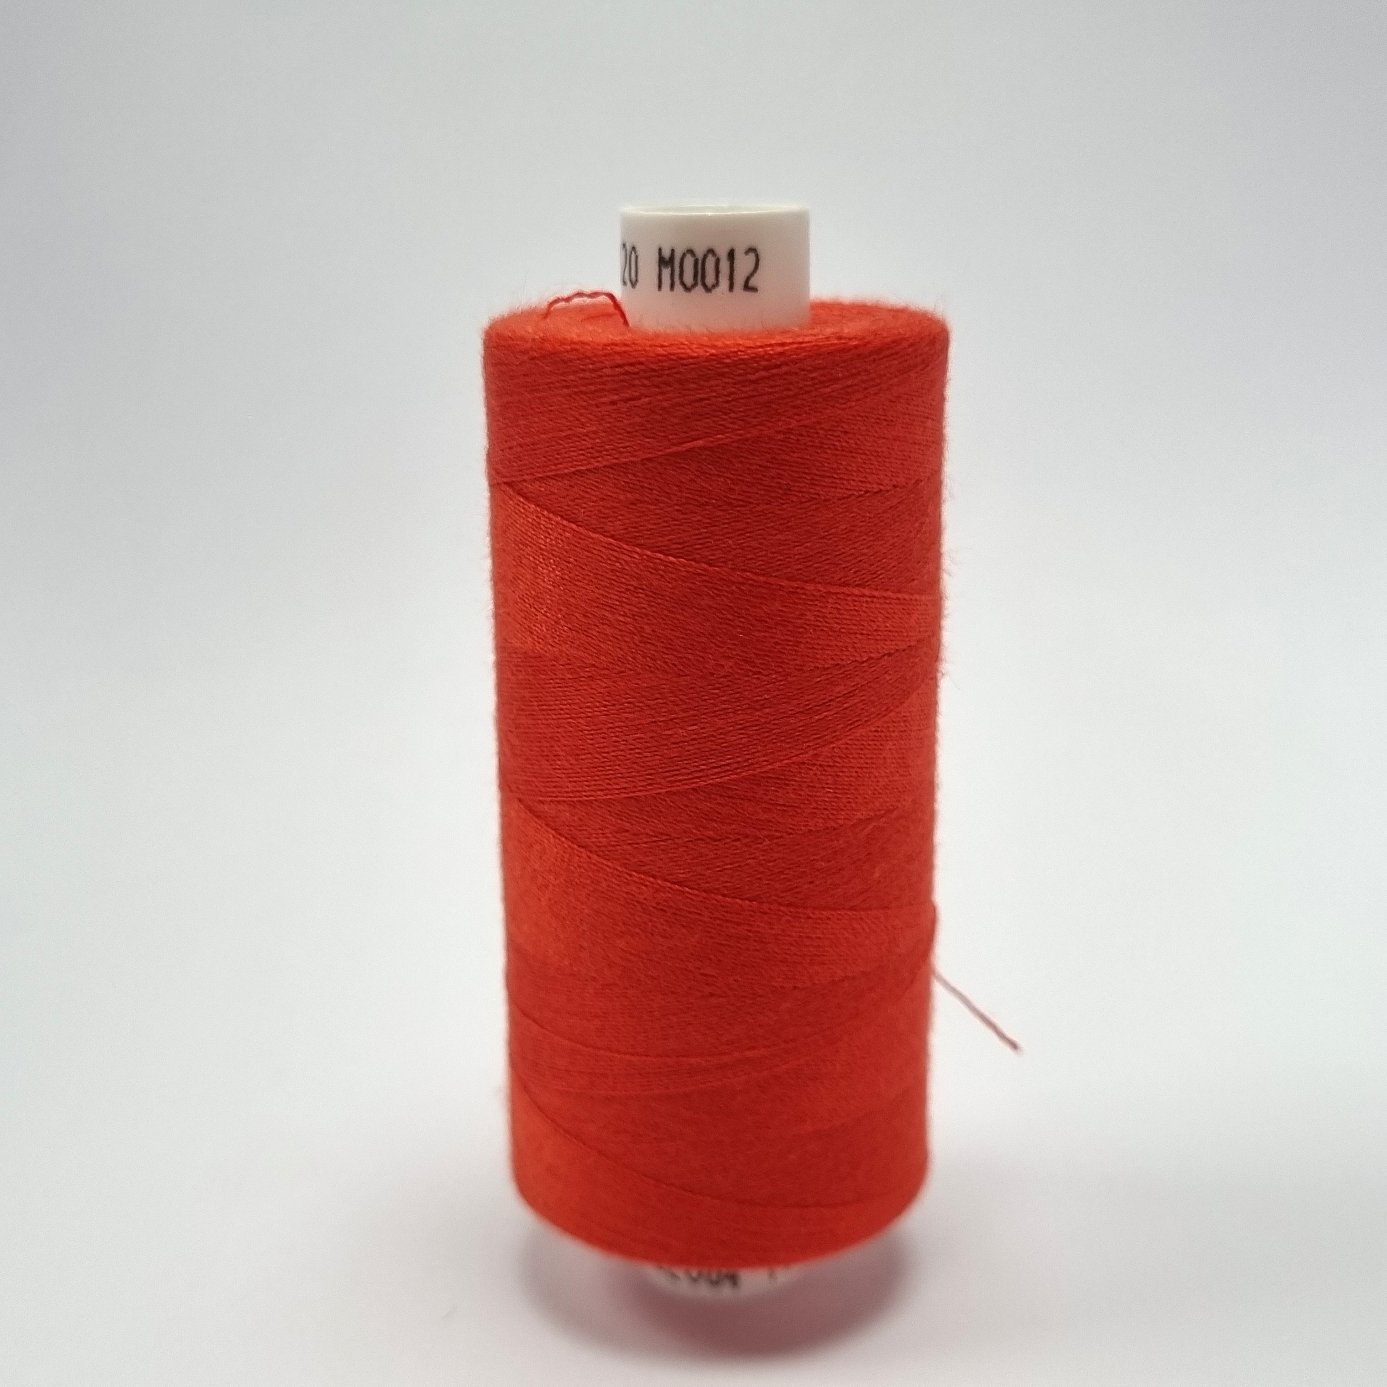 Moon Thread, Tomato, 1000 yard reels 99p from Jaycotts Sewing Supplies